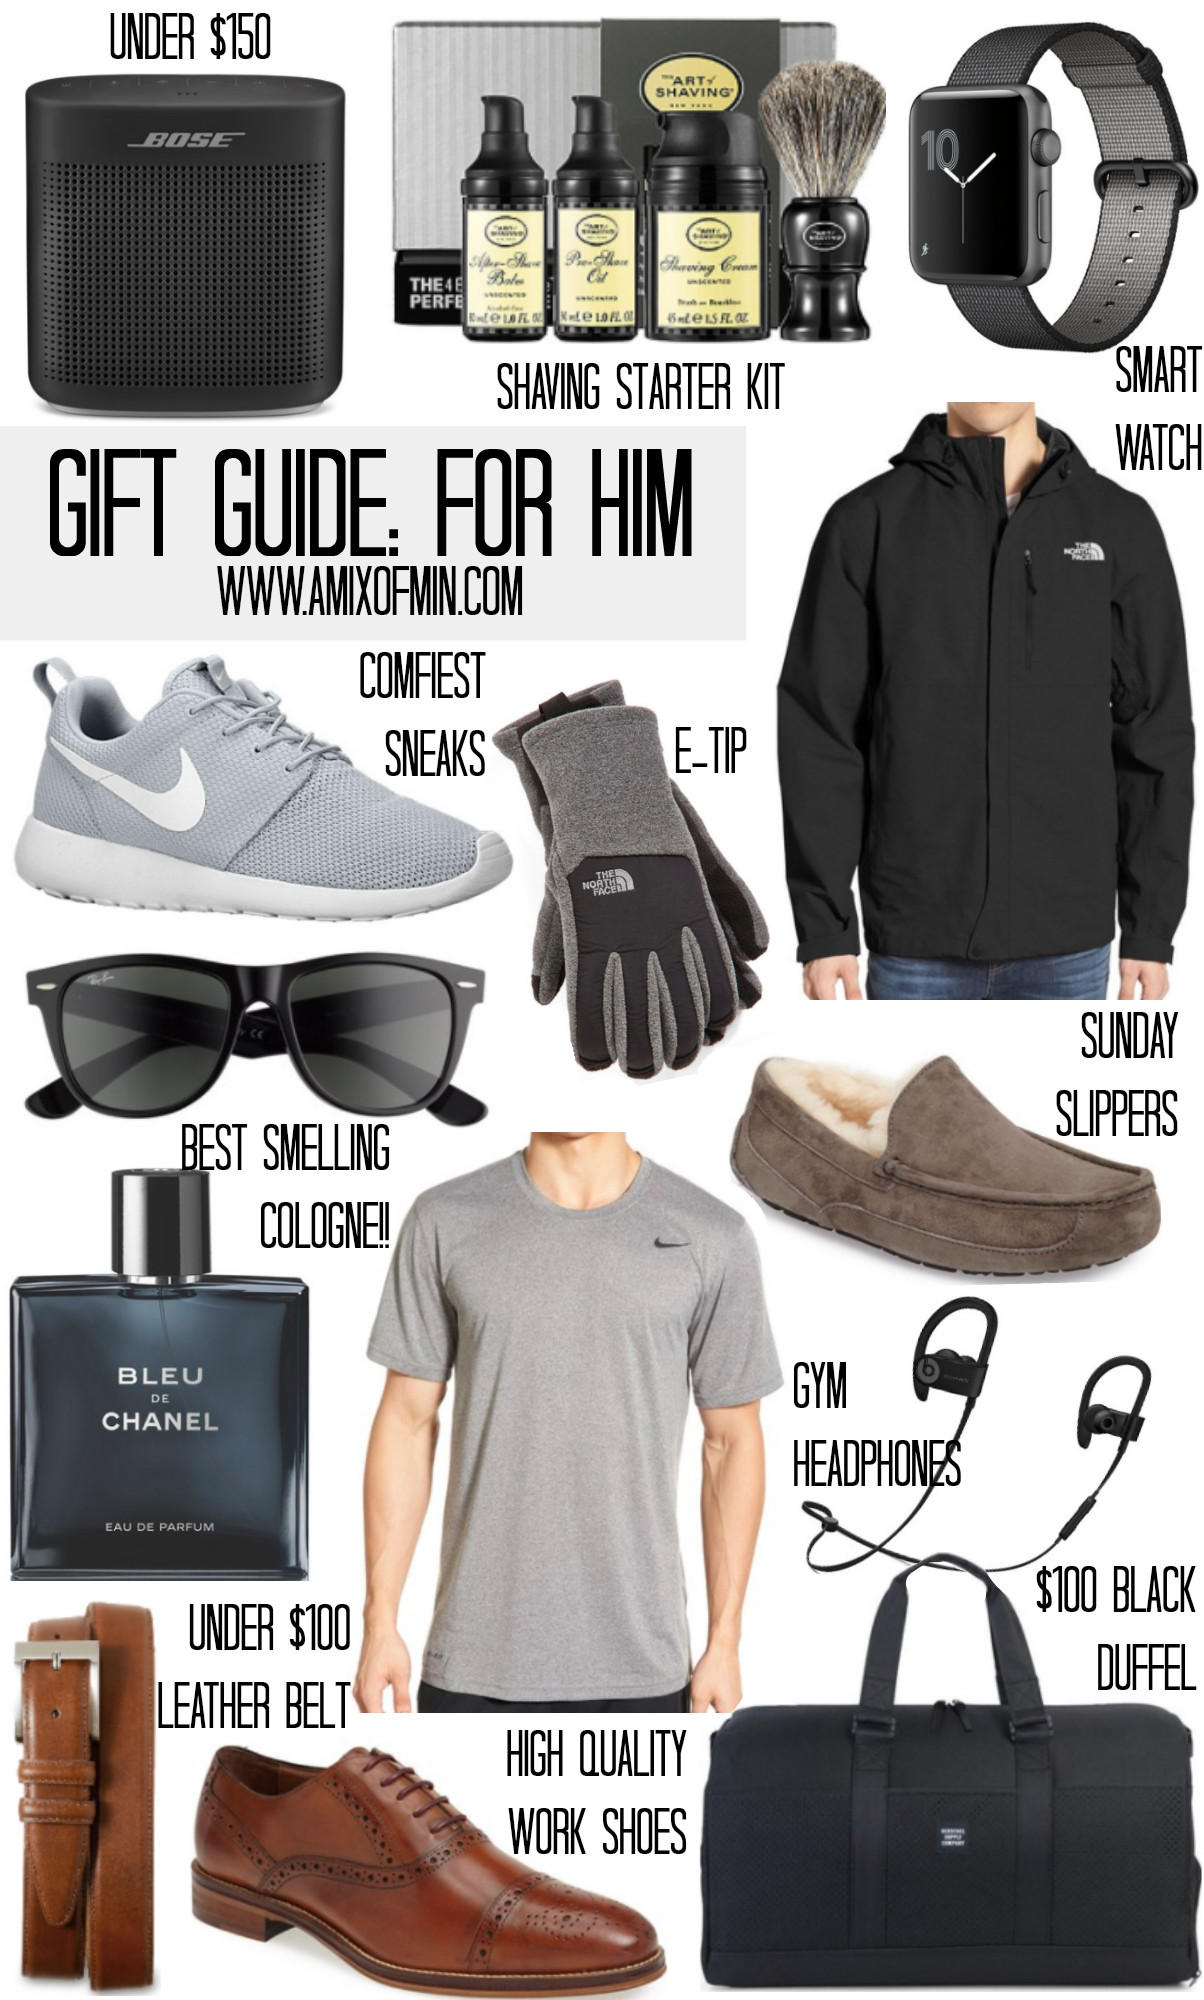 Boyfriend Gift Ideas For Christmas
 Ultimate Holiday Christmas Gift Guide for Him